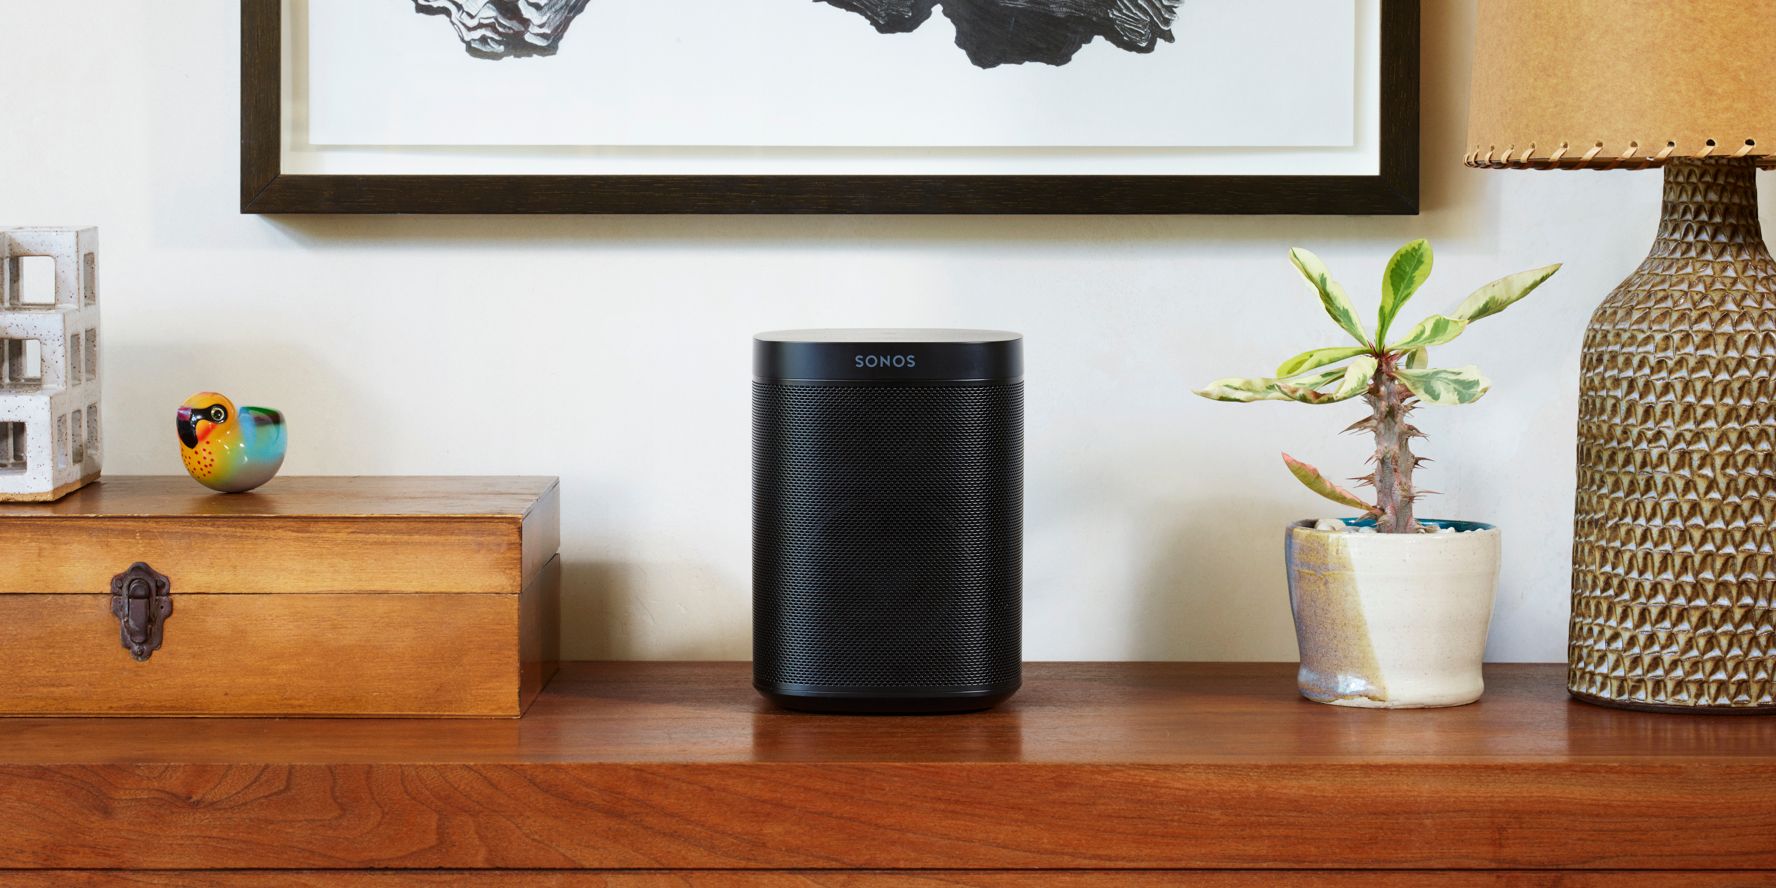 Heres How Much Sonos Speakers Will Cost After Latest Price Increase